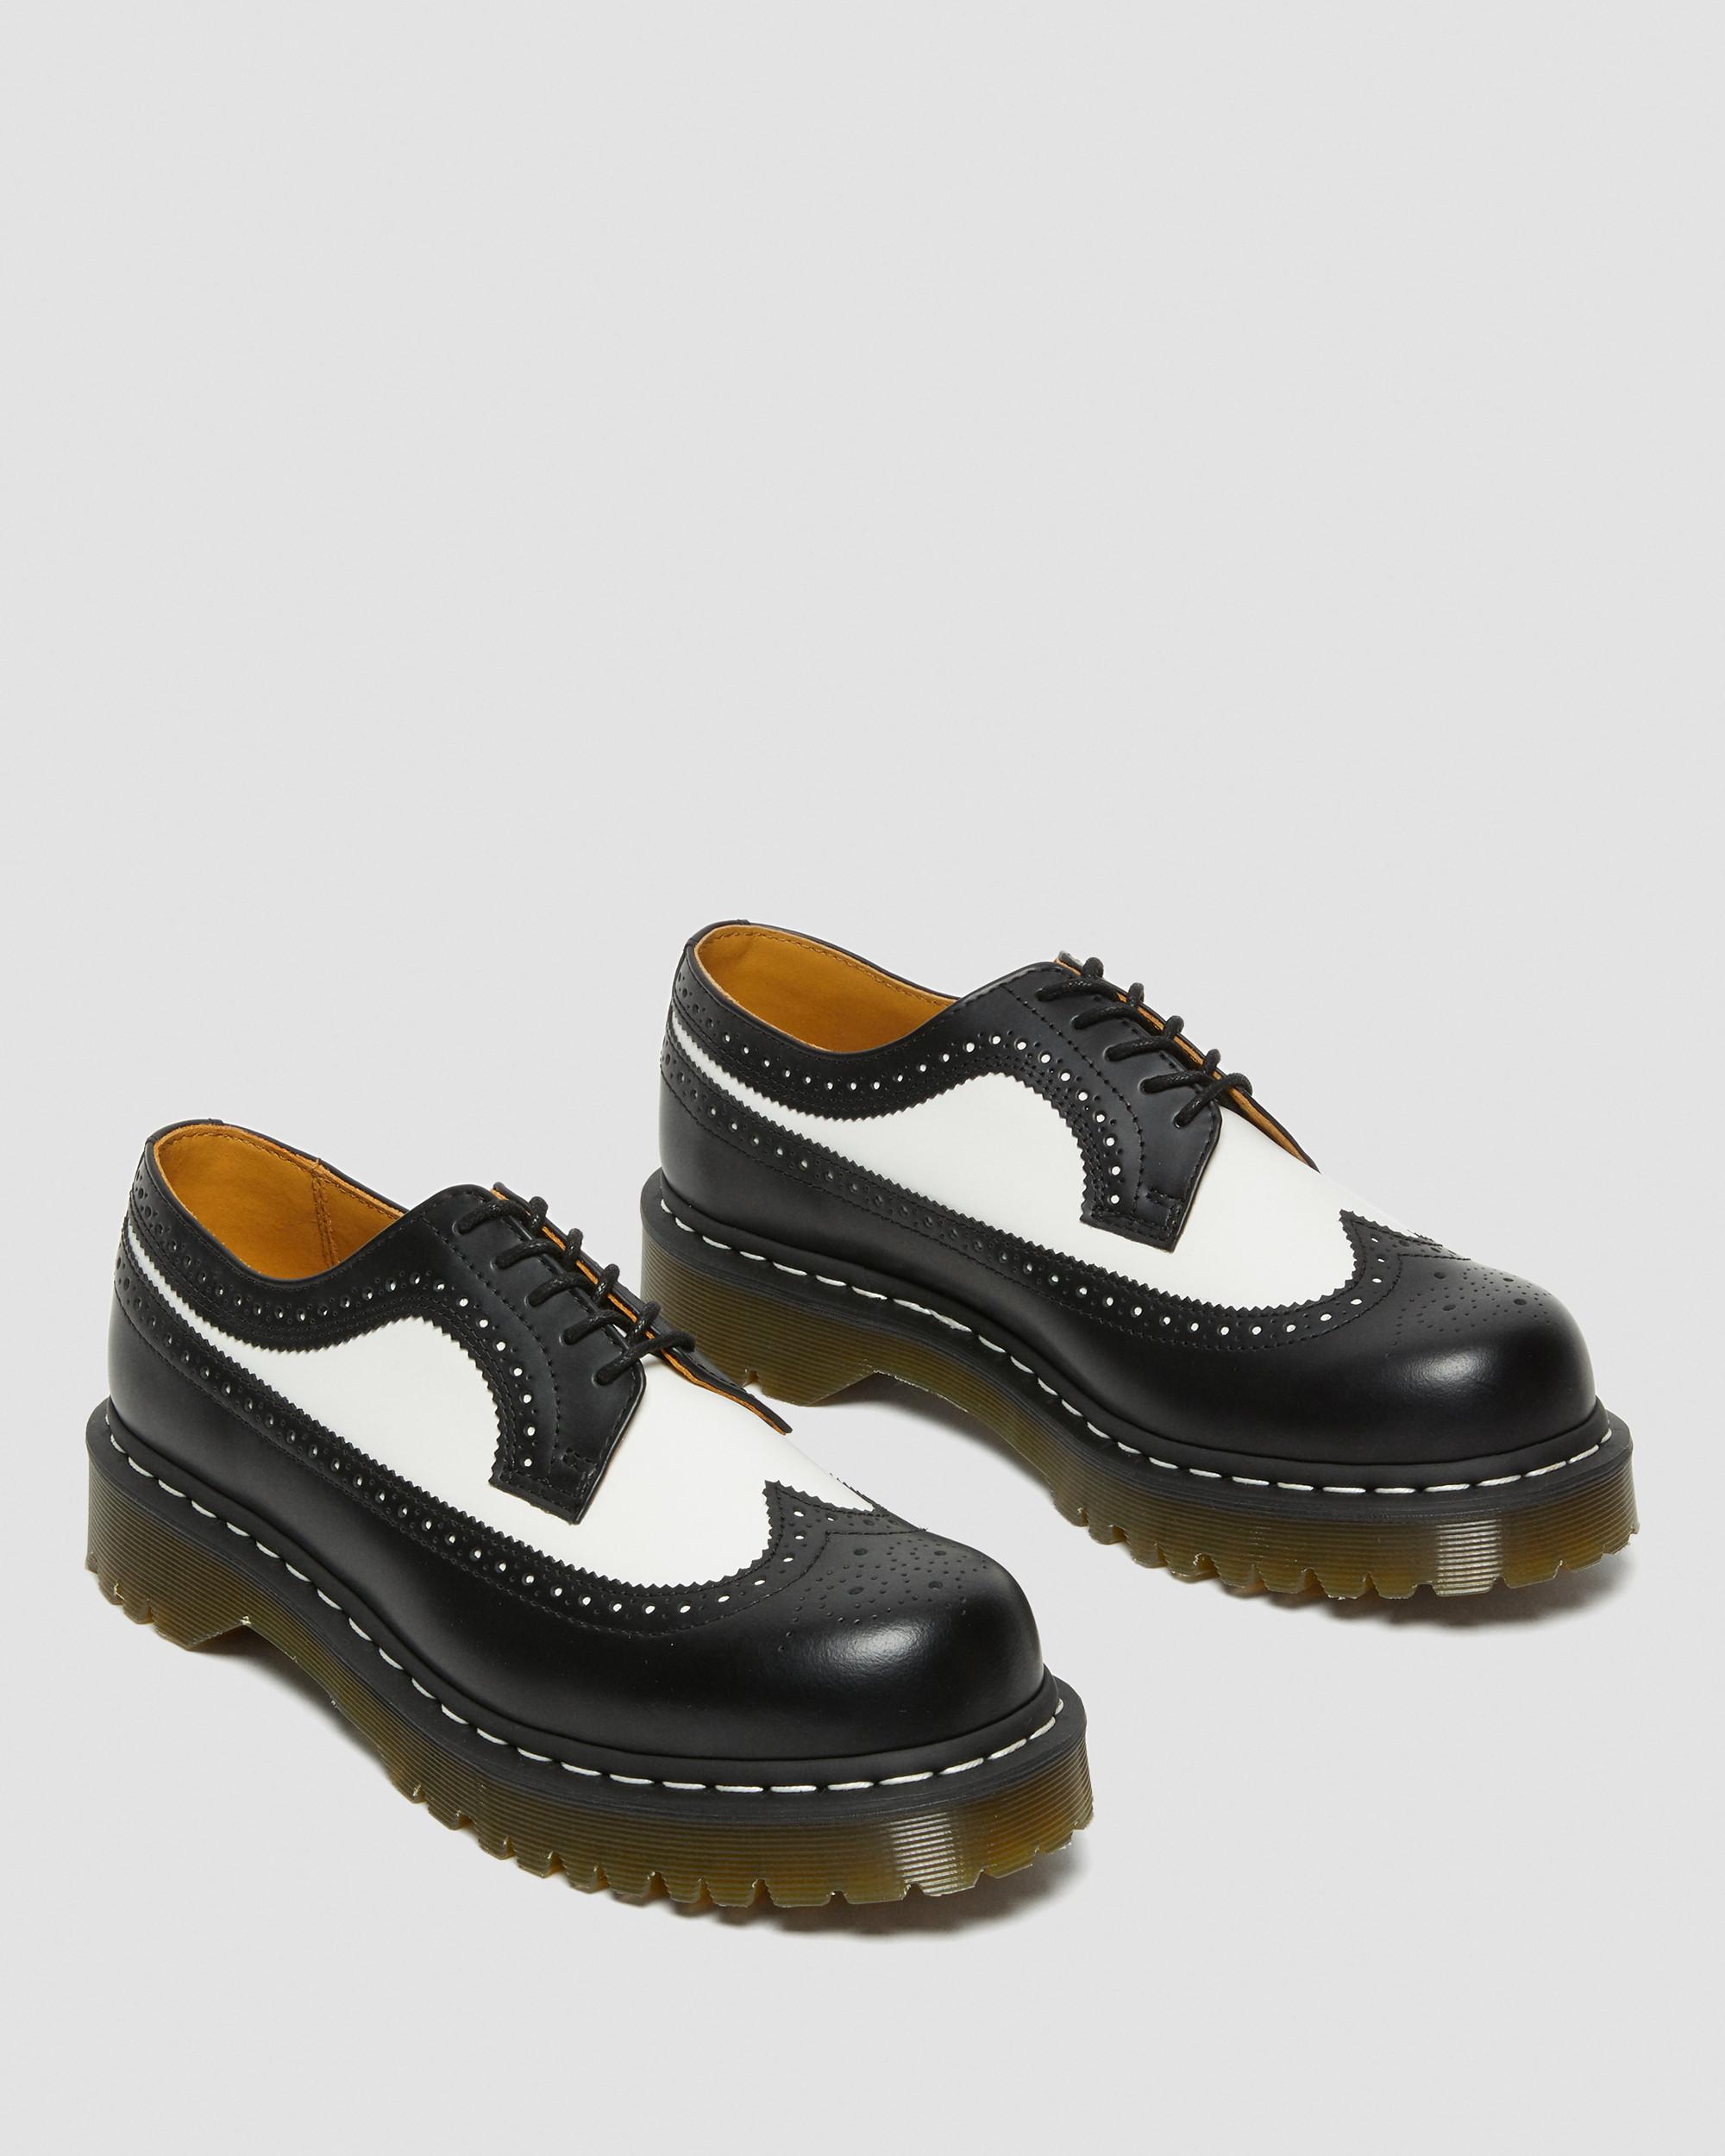 3989 Bex Smooth Leather Brogue Shoes, Black | Dr. Martens